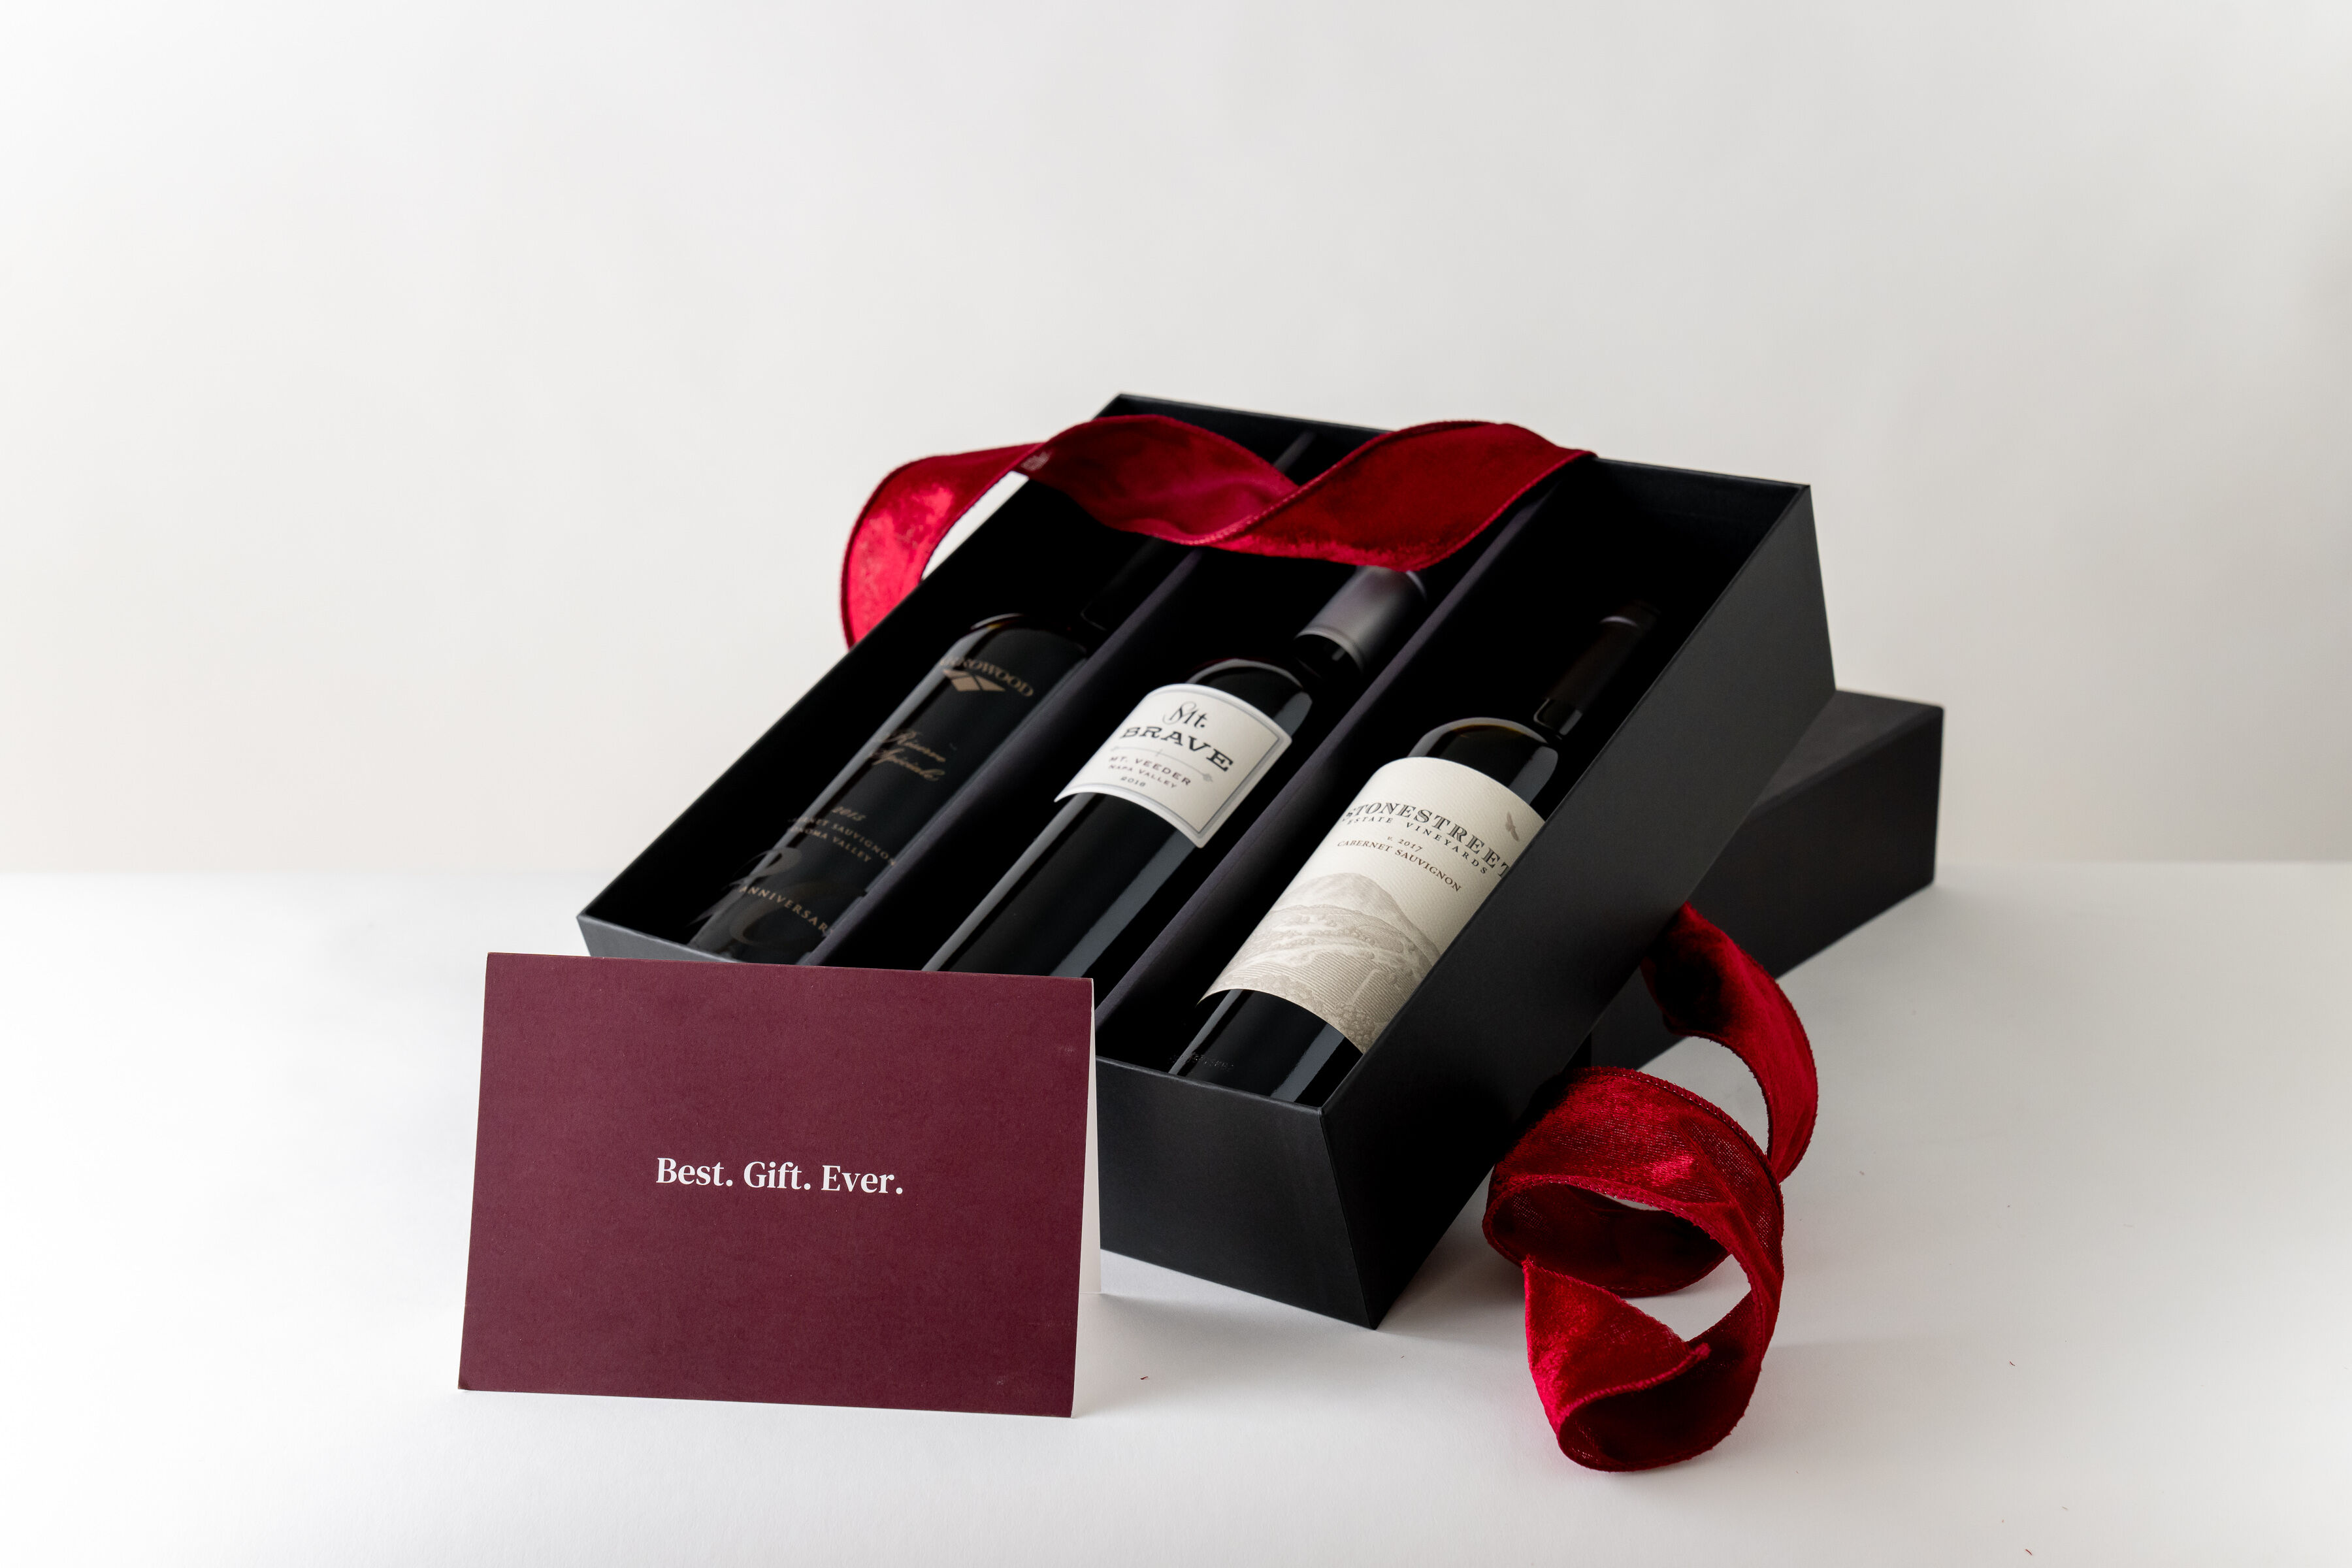 Gift set of wines in box with a bow